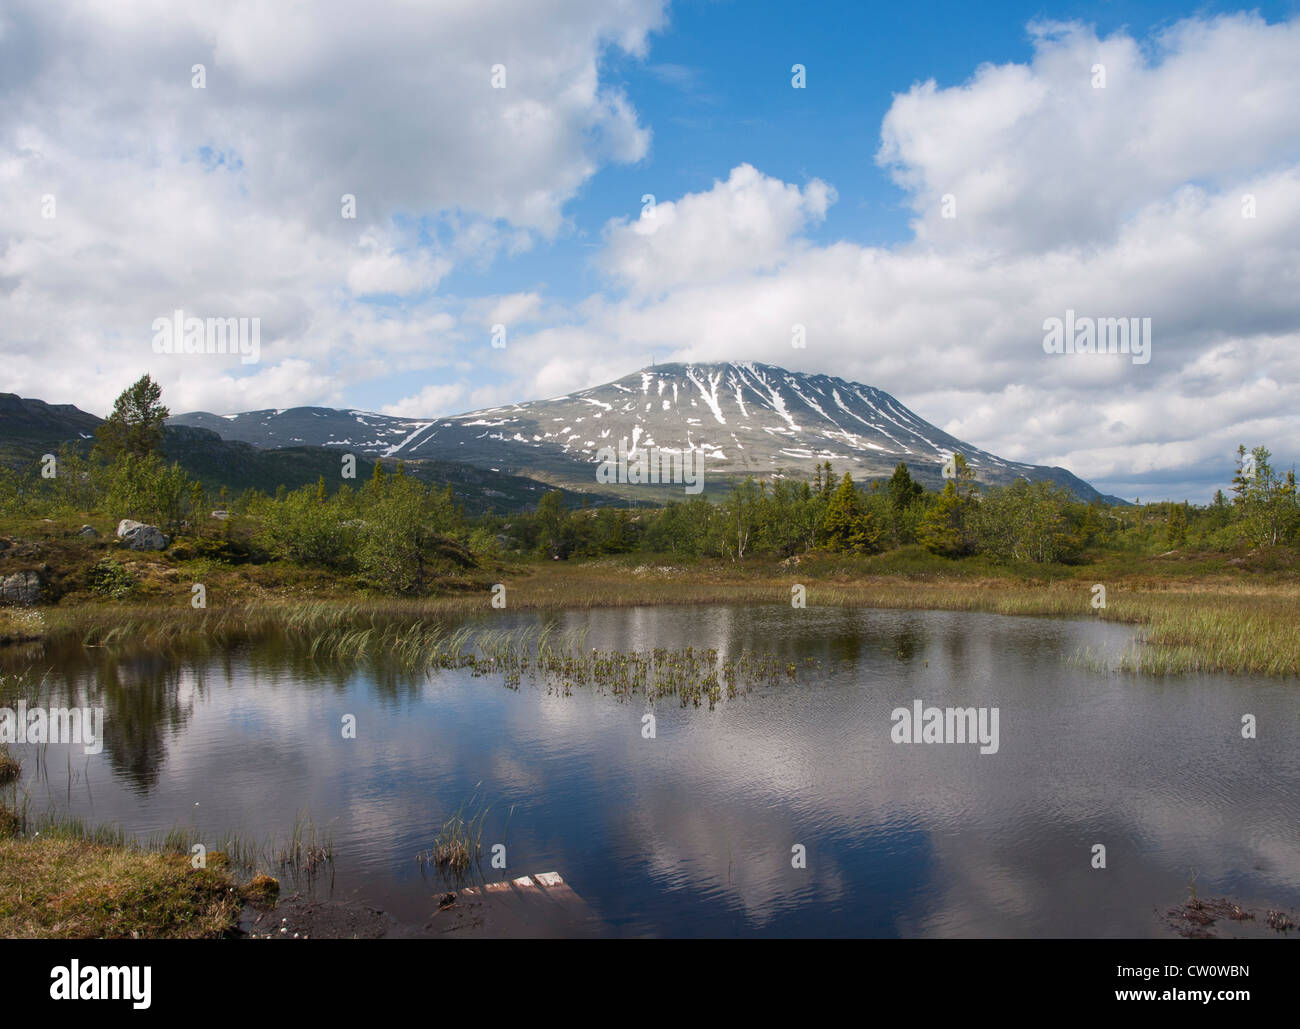 Gaustatoppen mountain in southern Norway seen from below Stock Photo